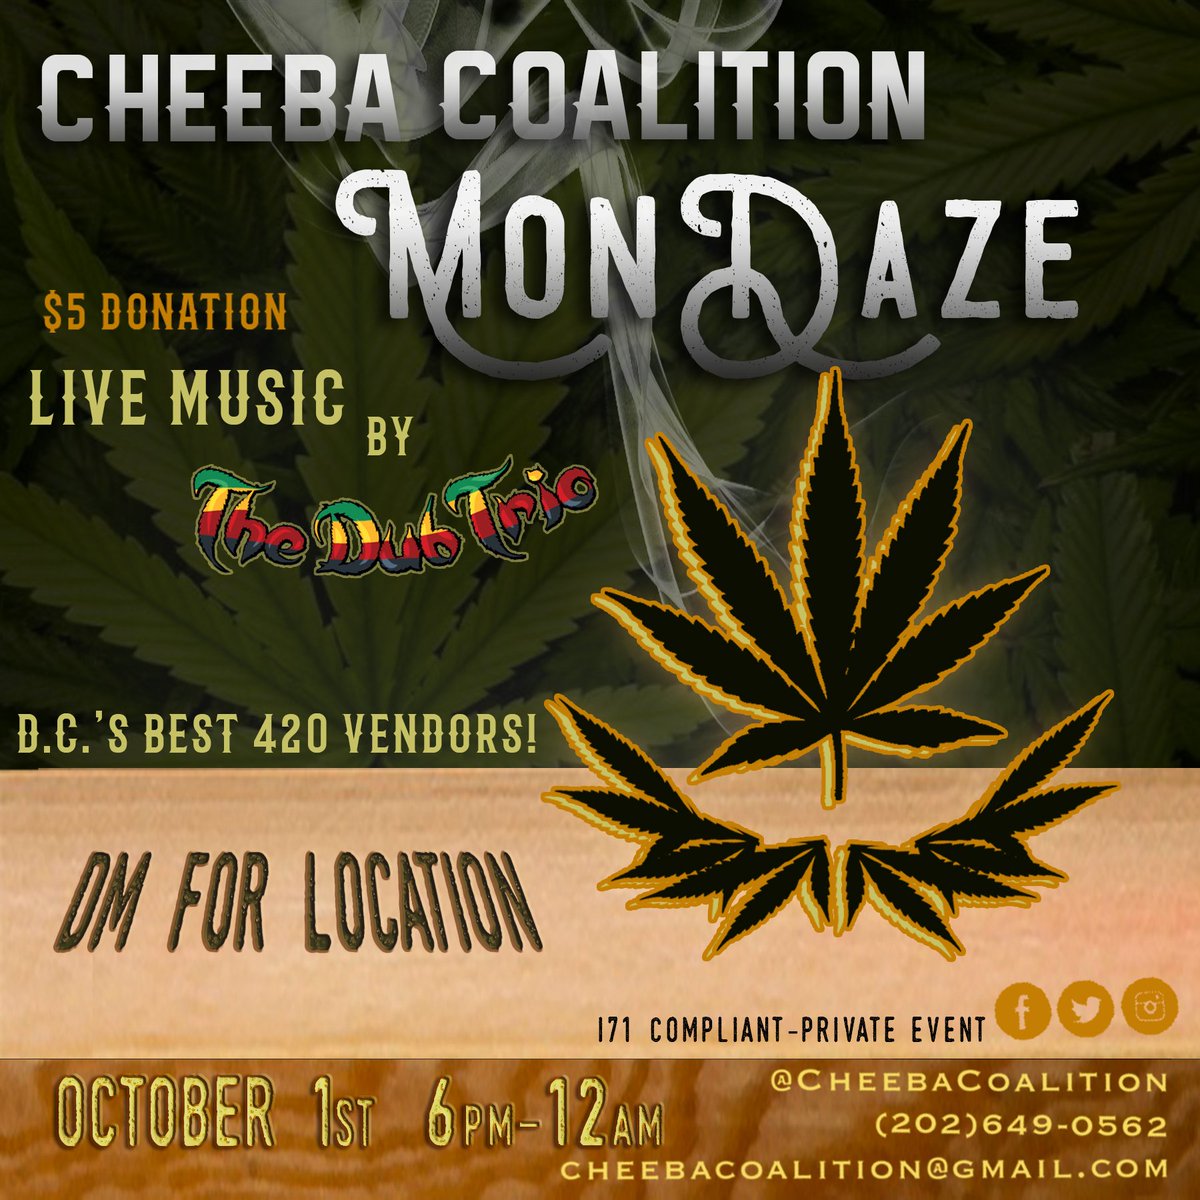 Don’t miss out! Come see us for Cheeba Coalition MonDaze! Ticket Link in bio. #cheebacoalition #initiative71 #i71 #420dc #nothingforsale #dcgrowers #dmvweed #dcweed #dmv420 #dccannabis